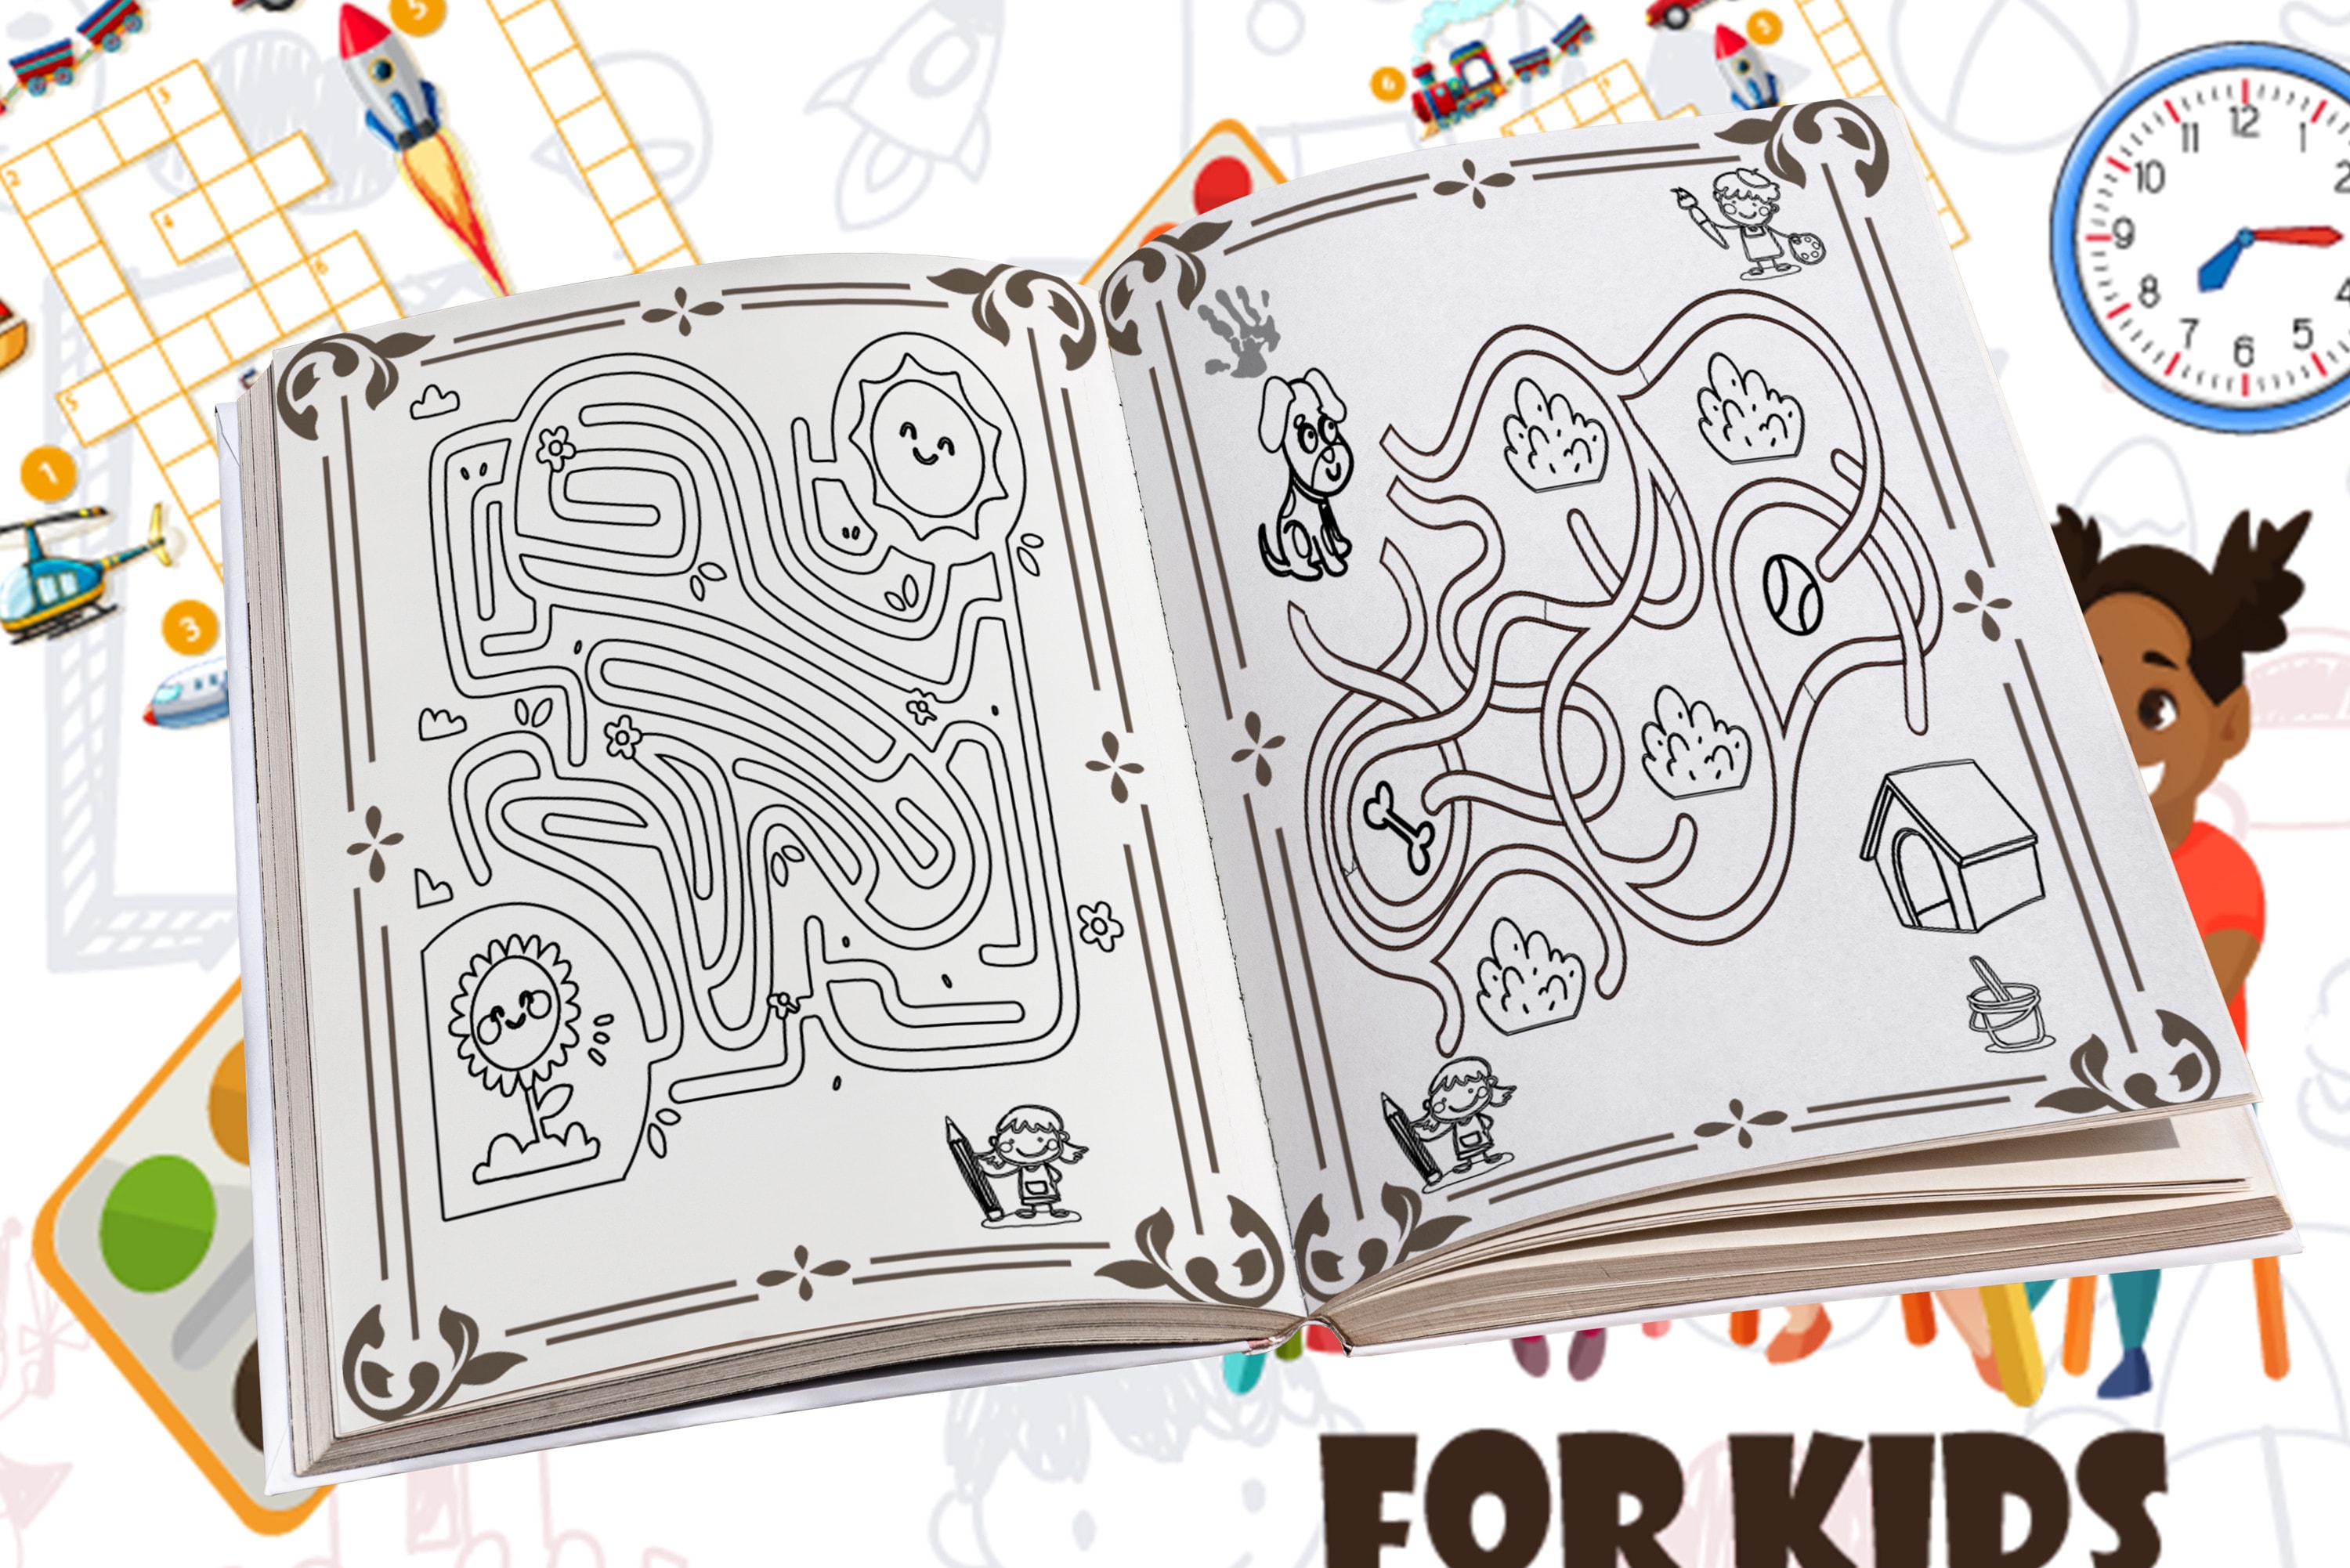 Activity Book Puzzles for Kids